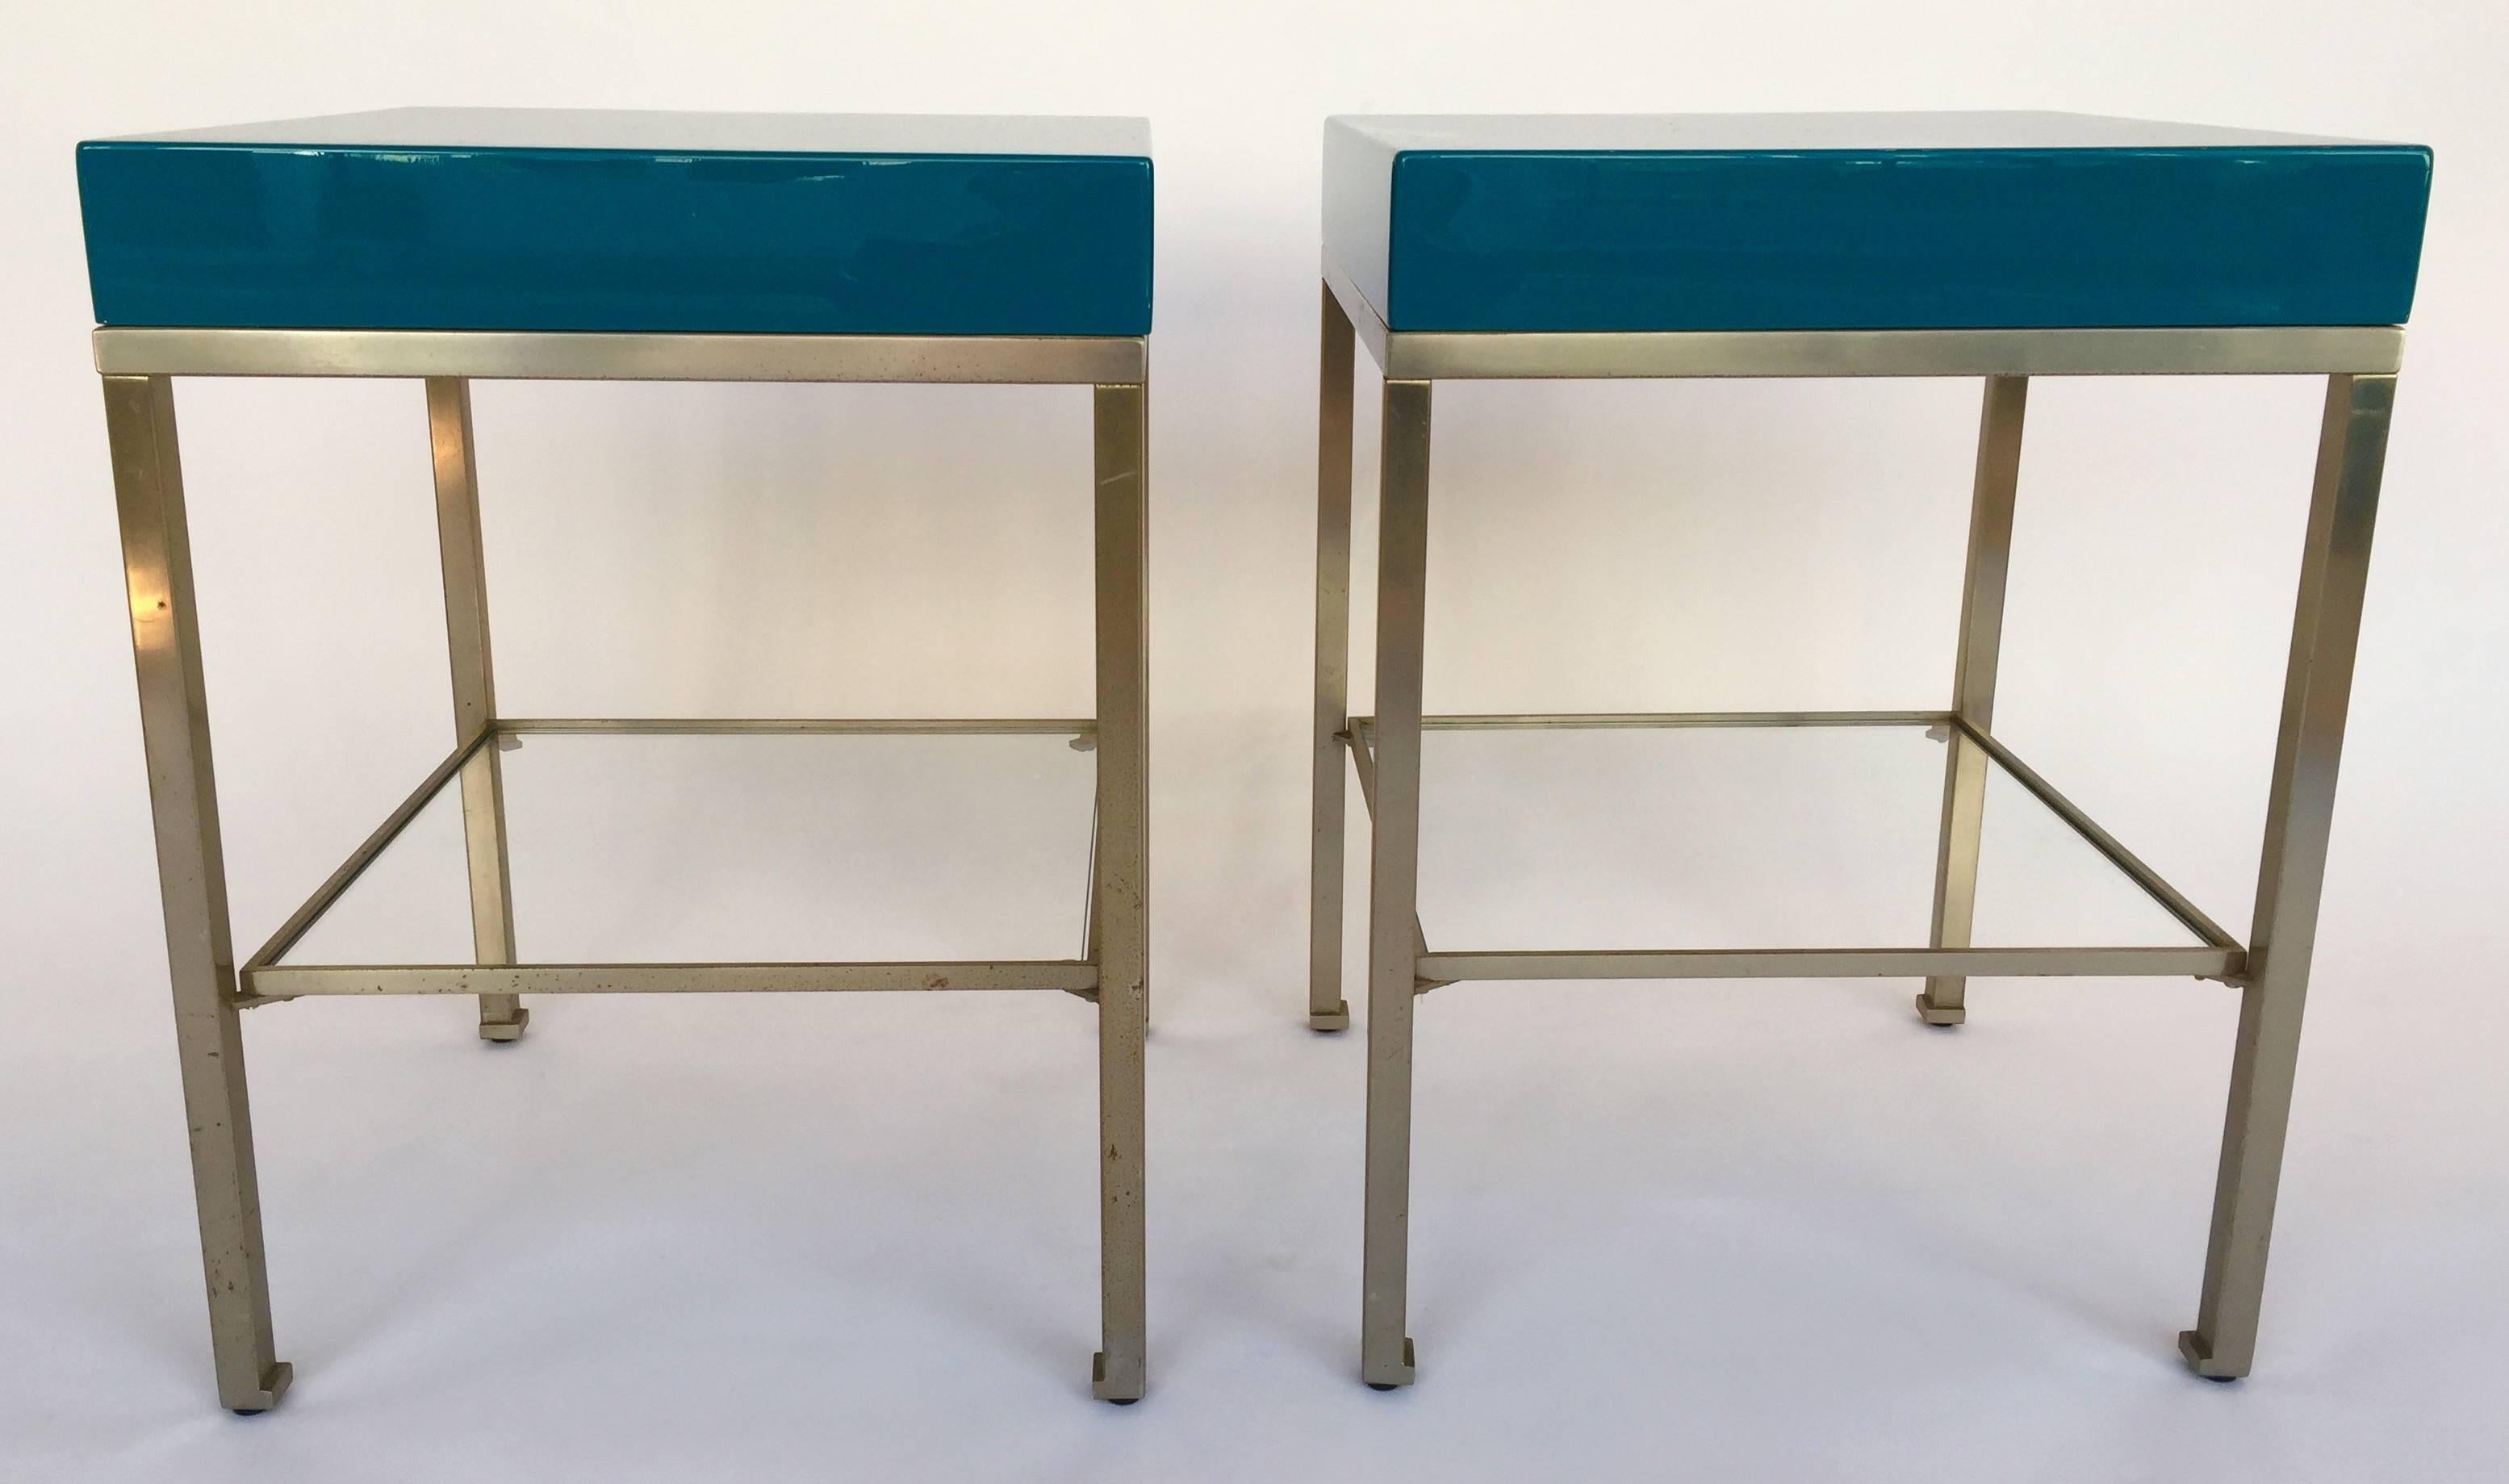 Mid-Century Modern pair of side end tables or nightstands from the iconic model of Guy Lefevre for the Maison Jansen, Paris, France. Rare and beautiful tropical bleu lacquer, interior drawers in wood. Feet in nickeled brass. Guy Lefevre is the best